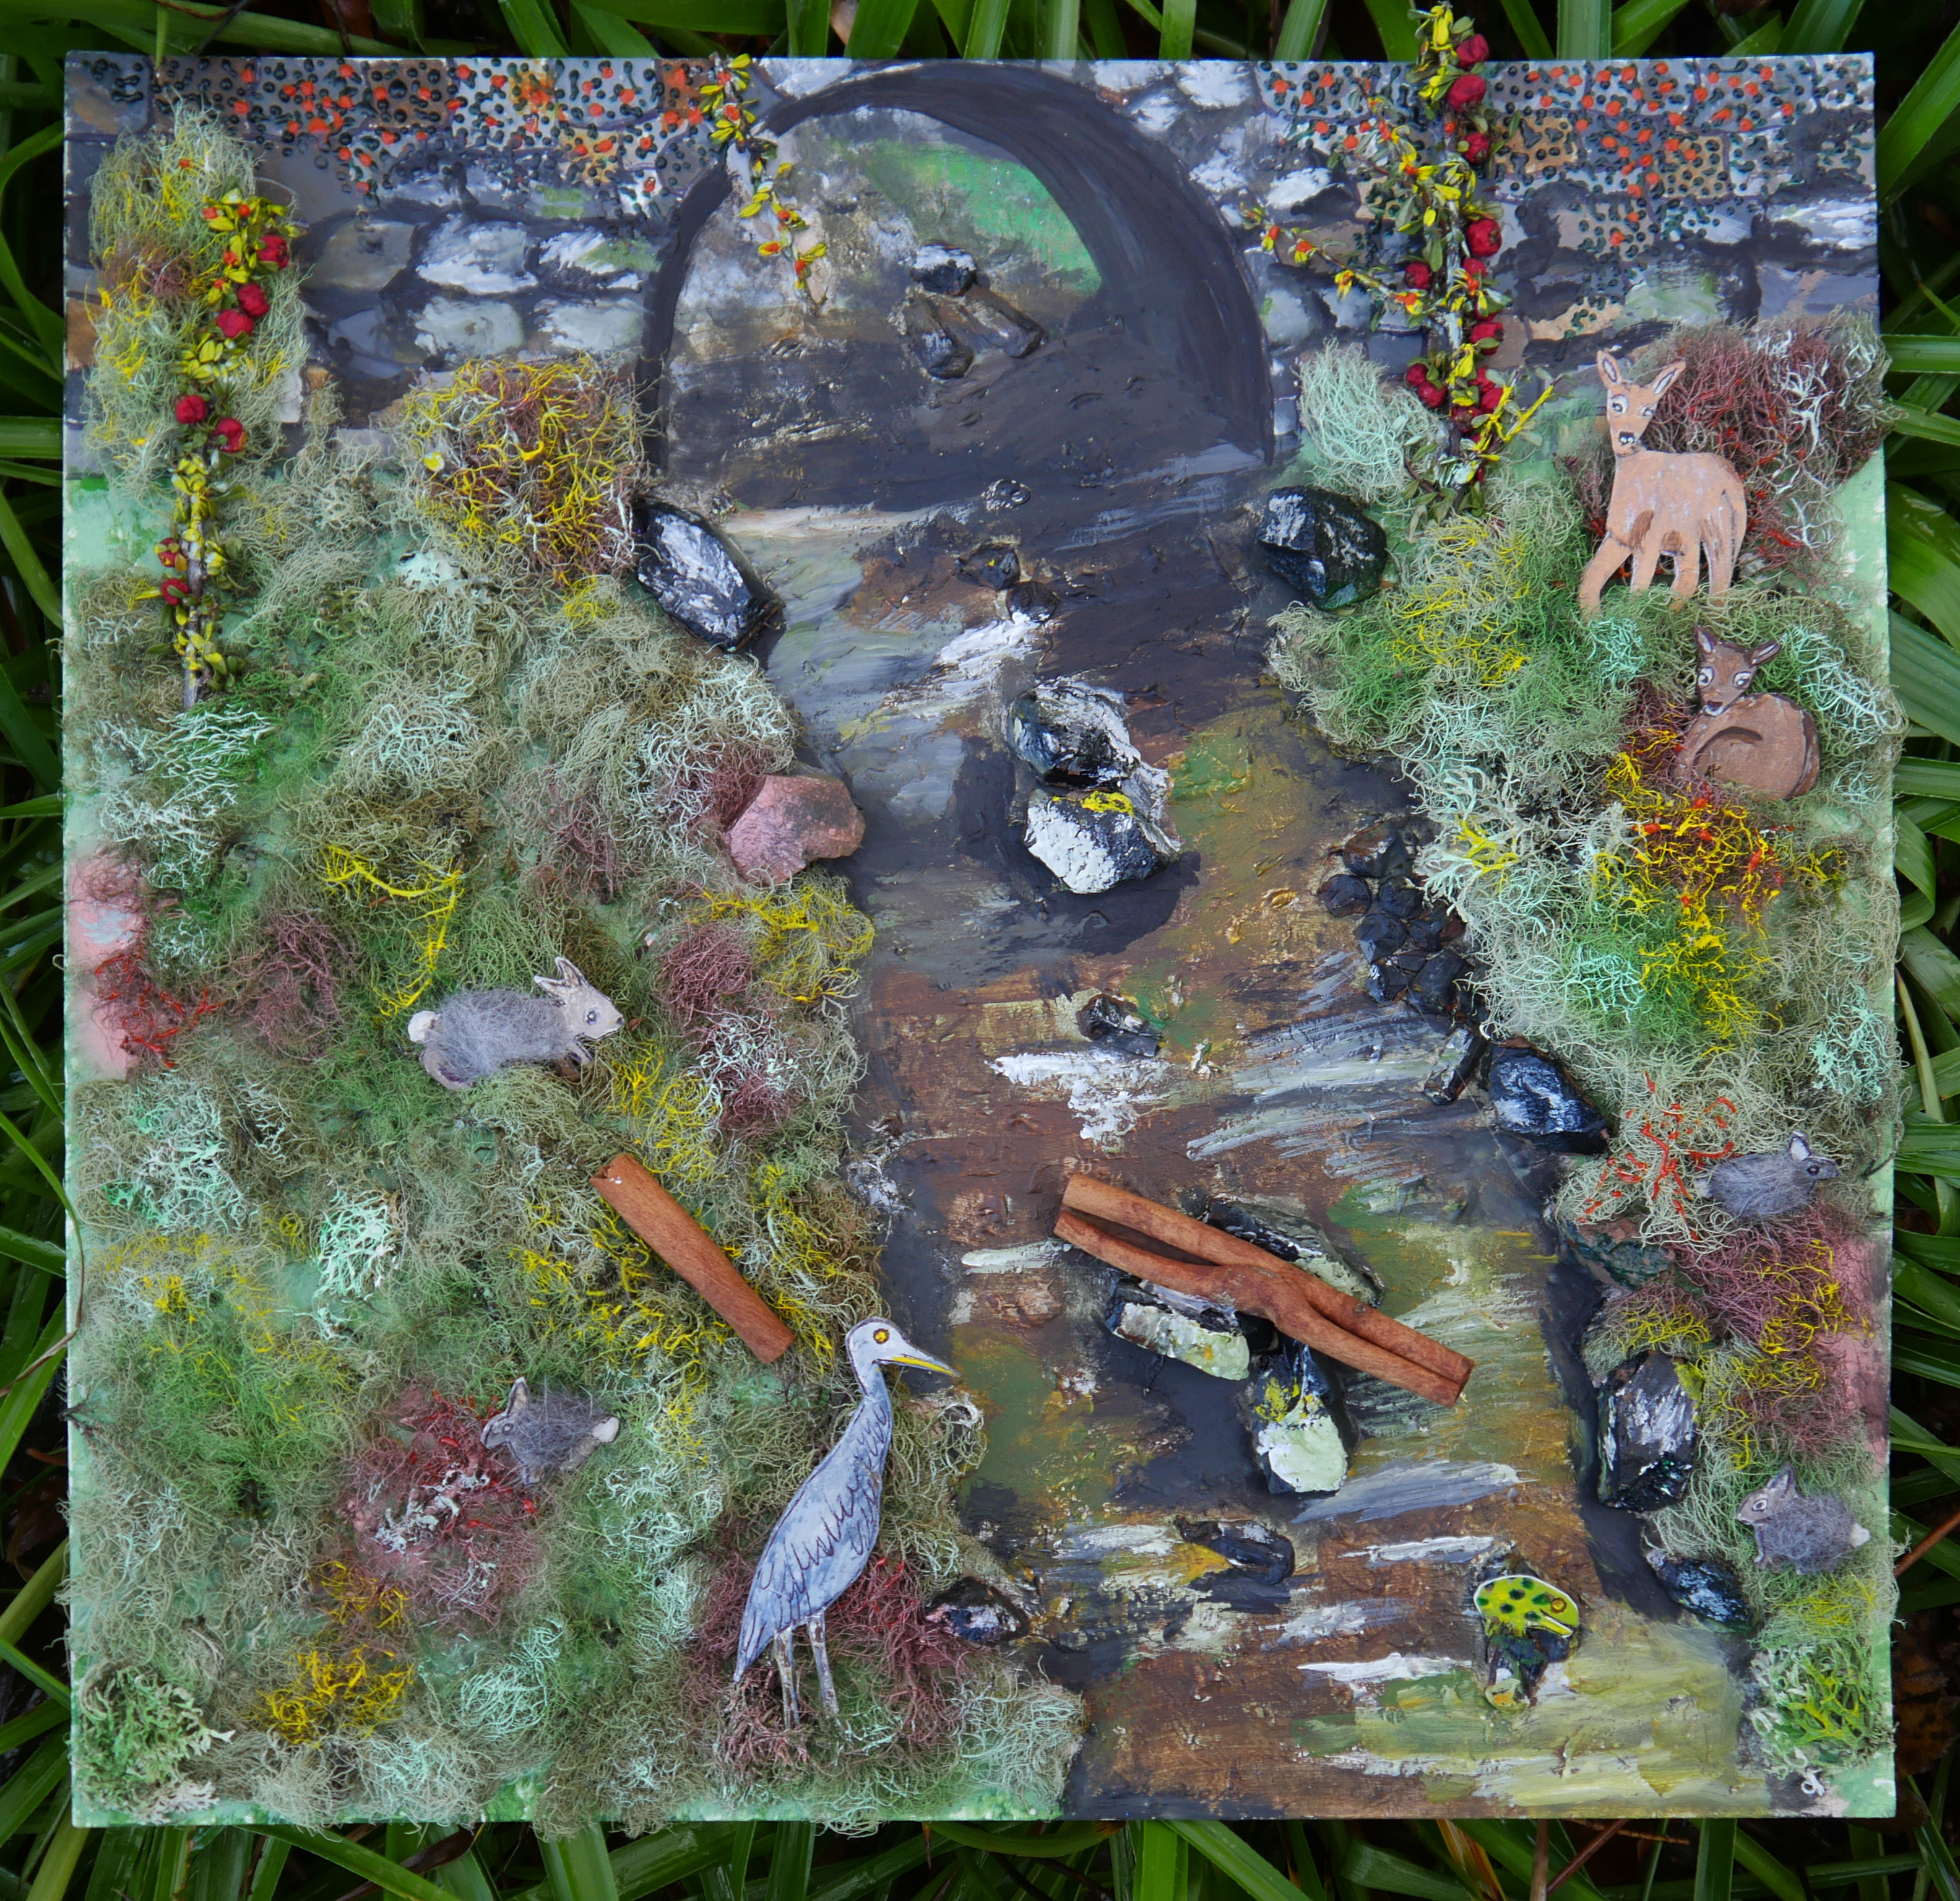 Collage artwork of animals and plants by a river